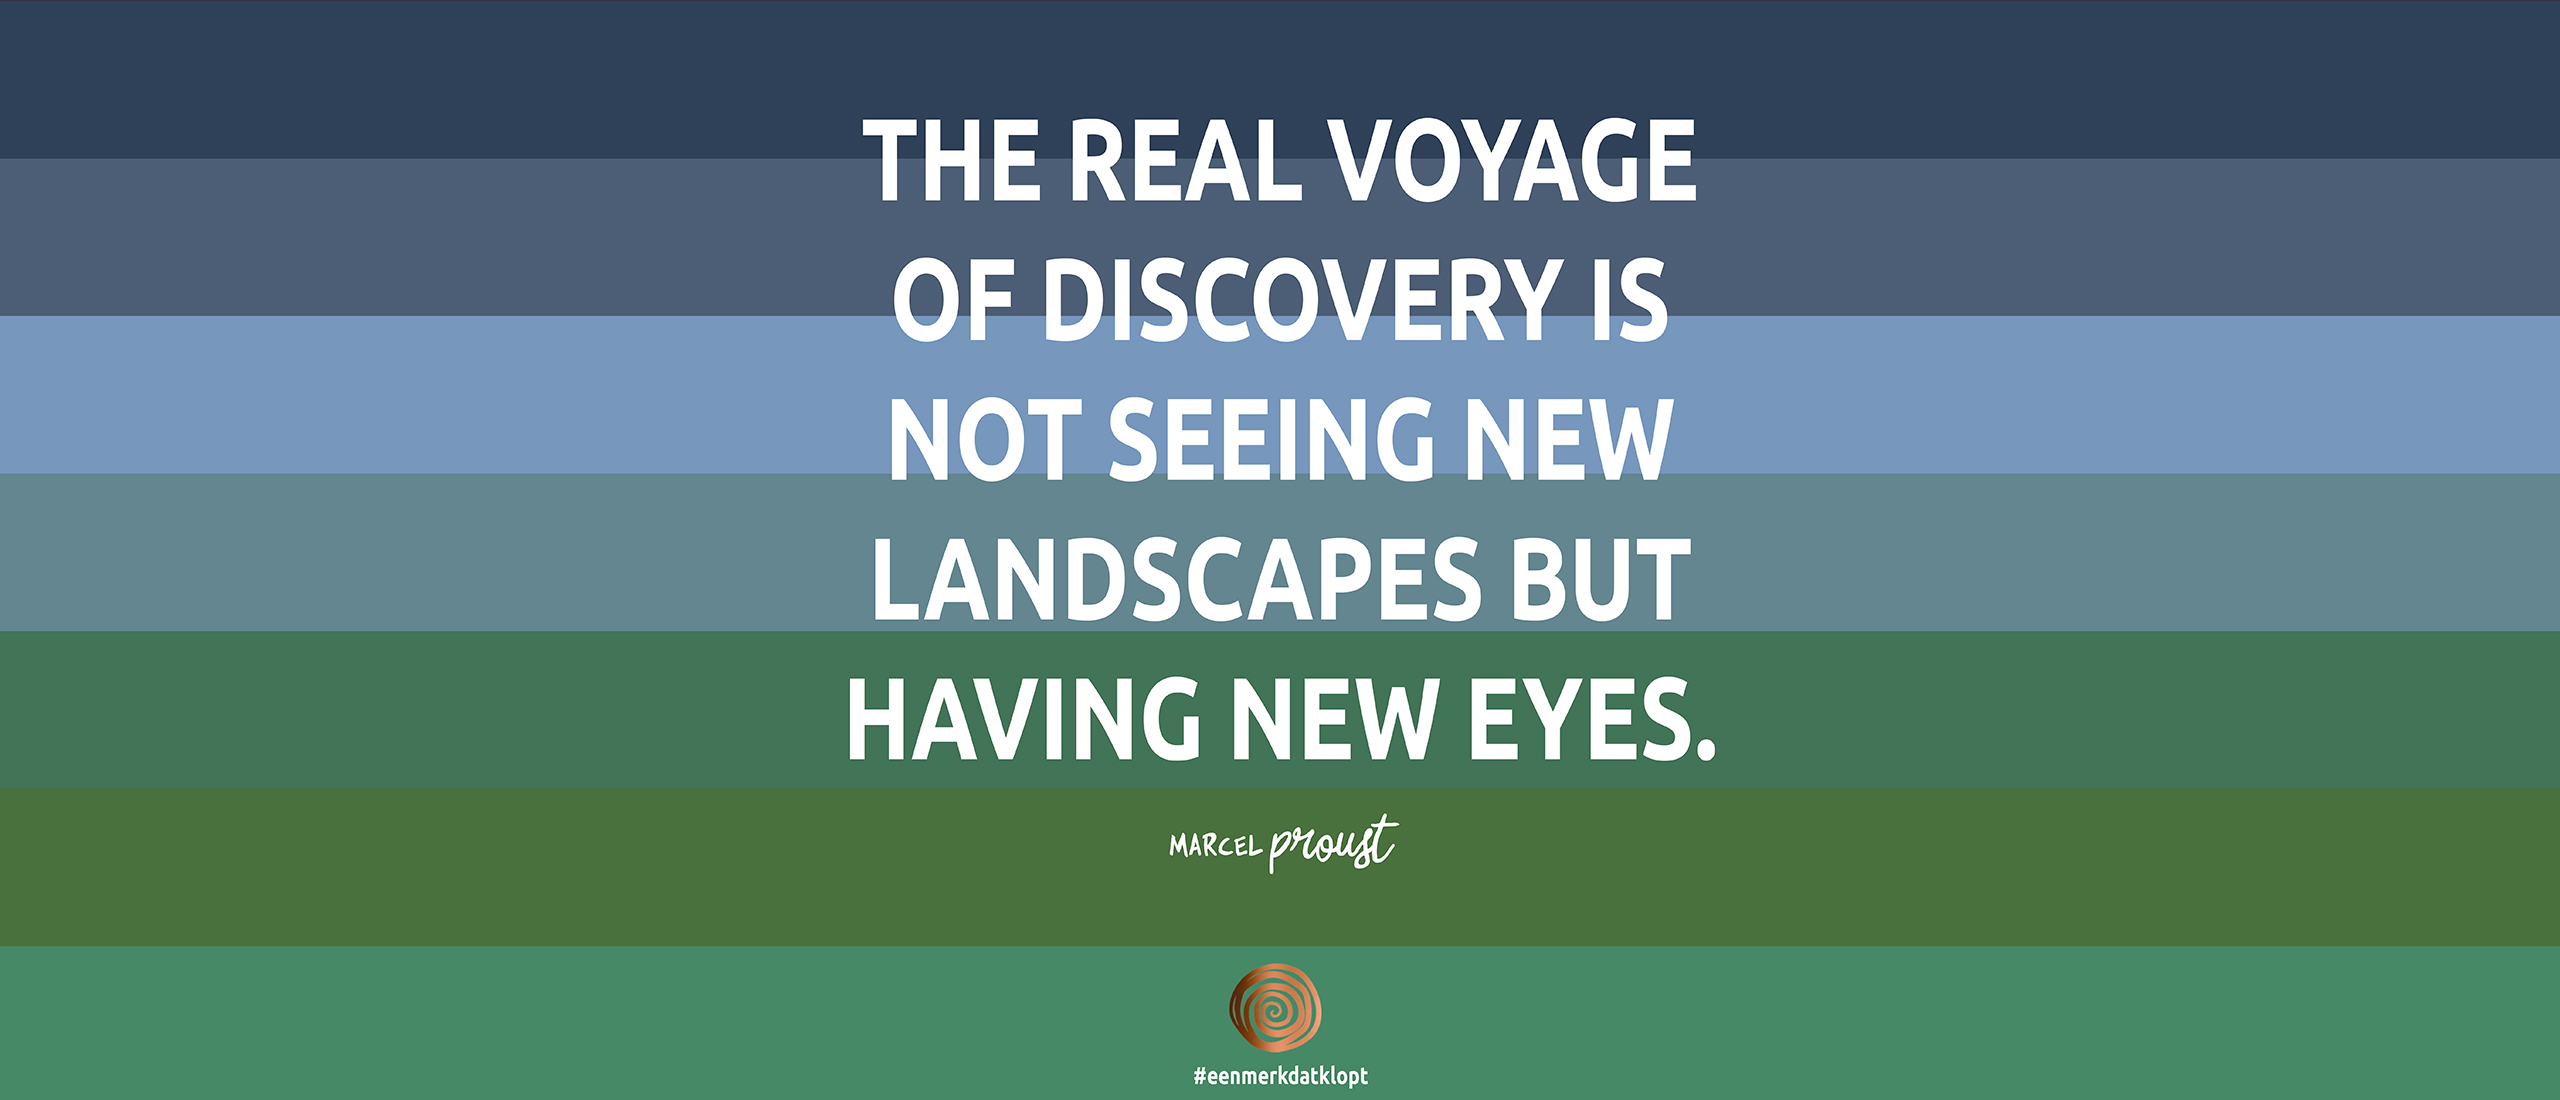 The real voyage of discovery